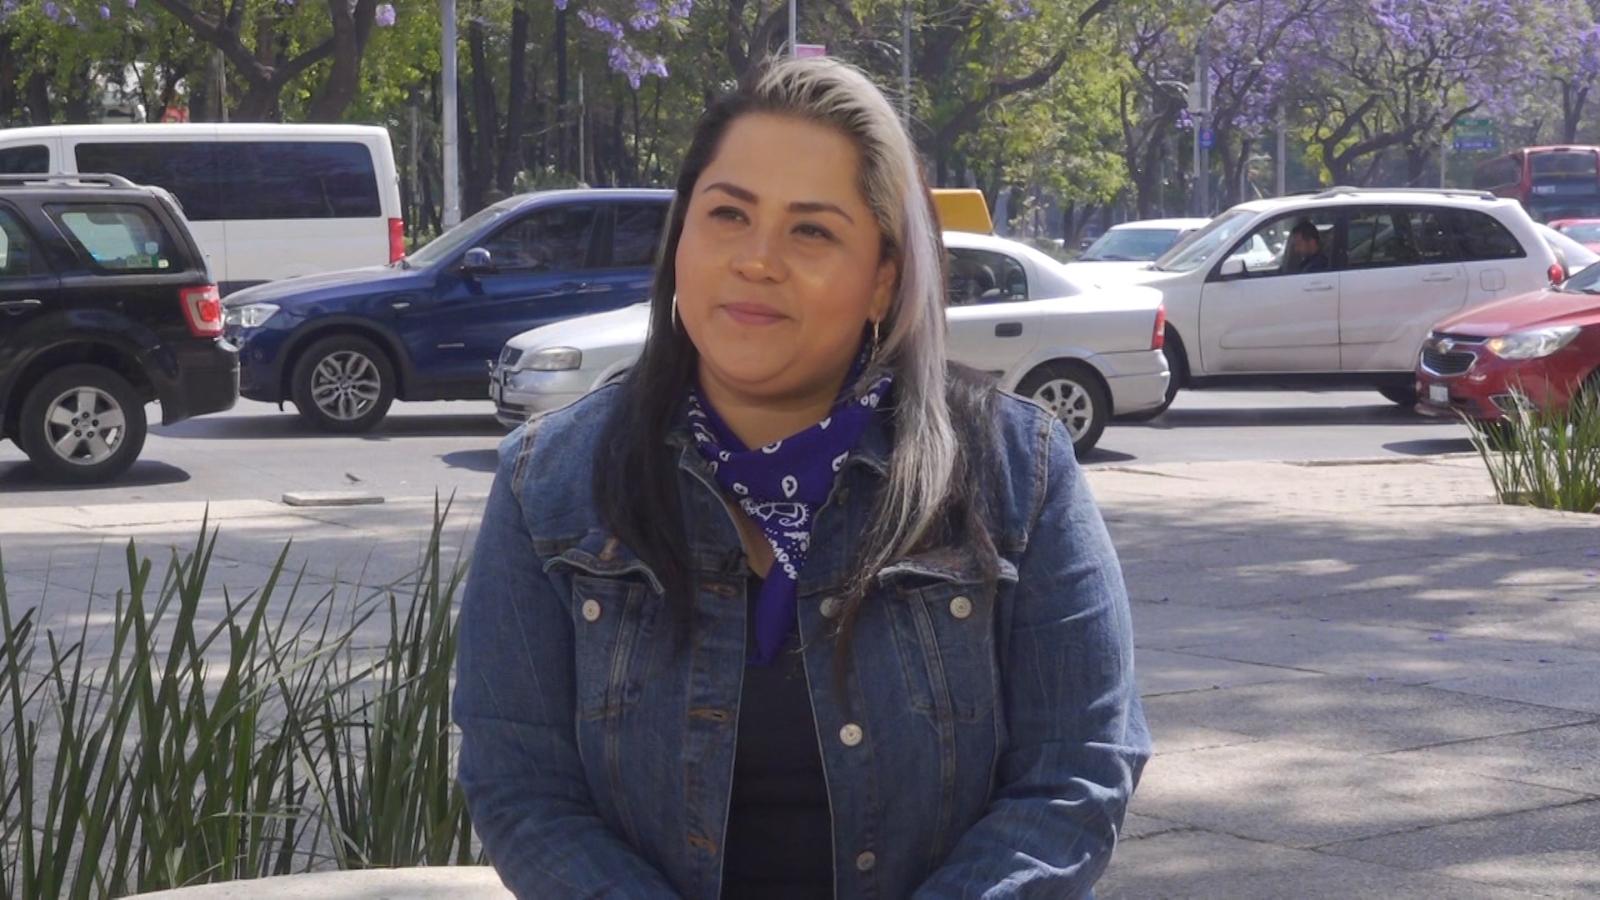 “Canción sin miedo”, the feminist anthem that unites many women in Latin America.  Conversations with Vivir Quintana, theme creator |  Video